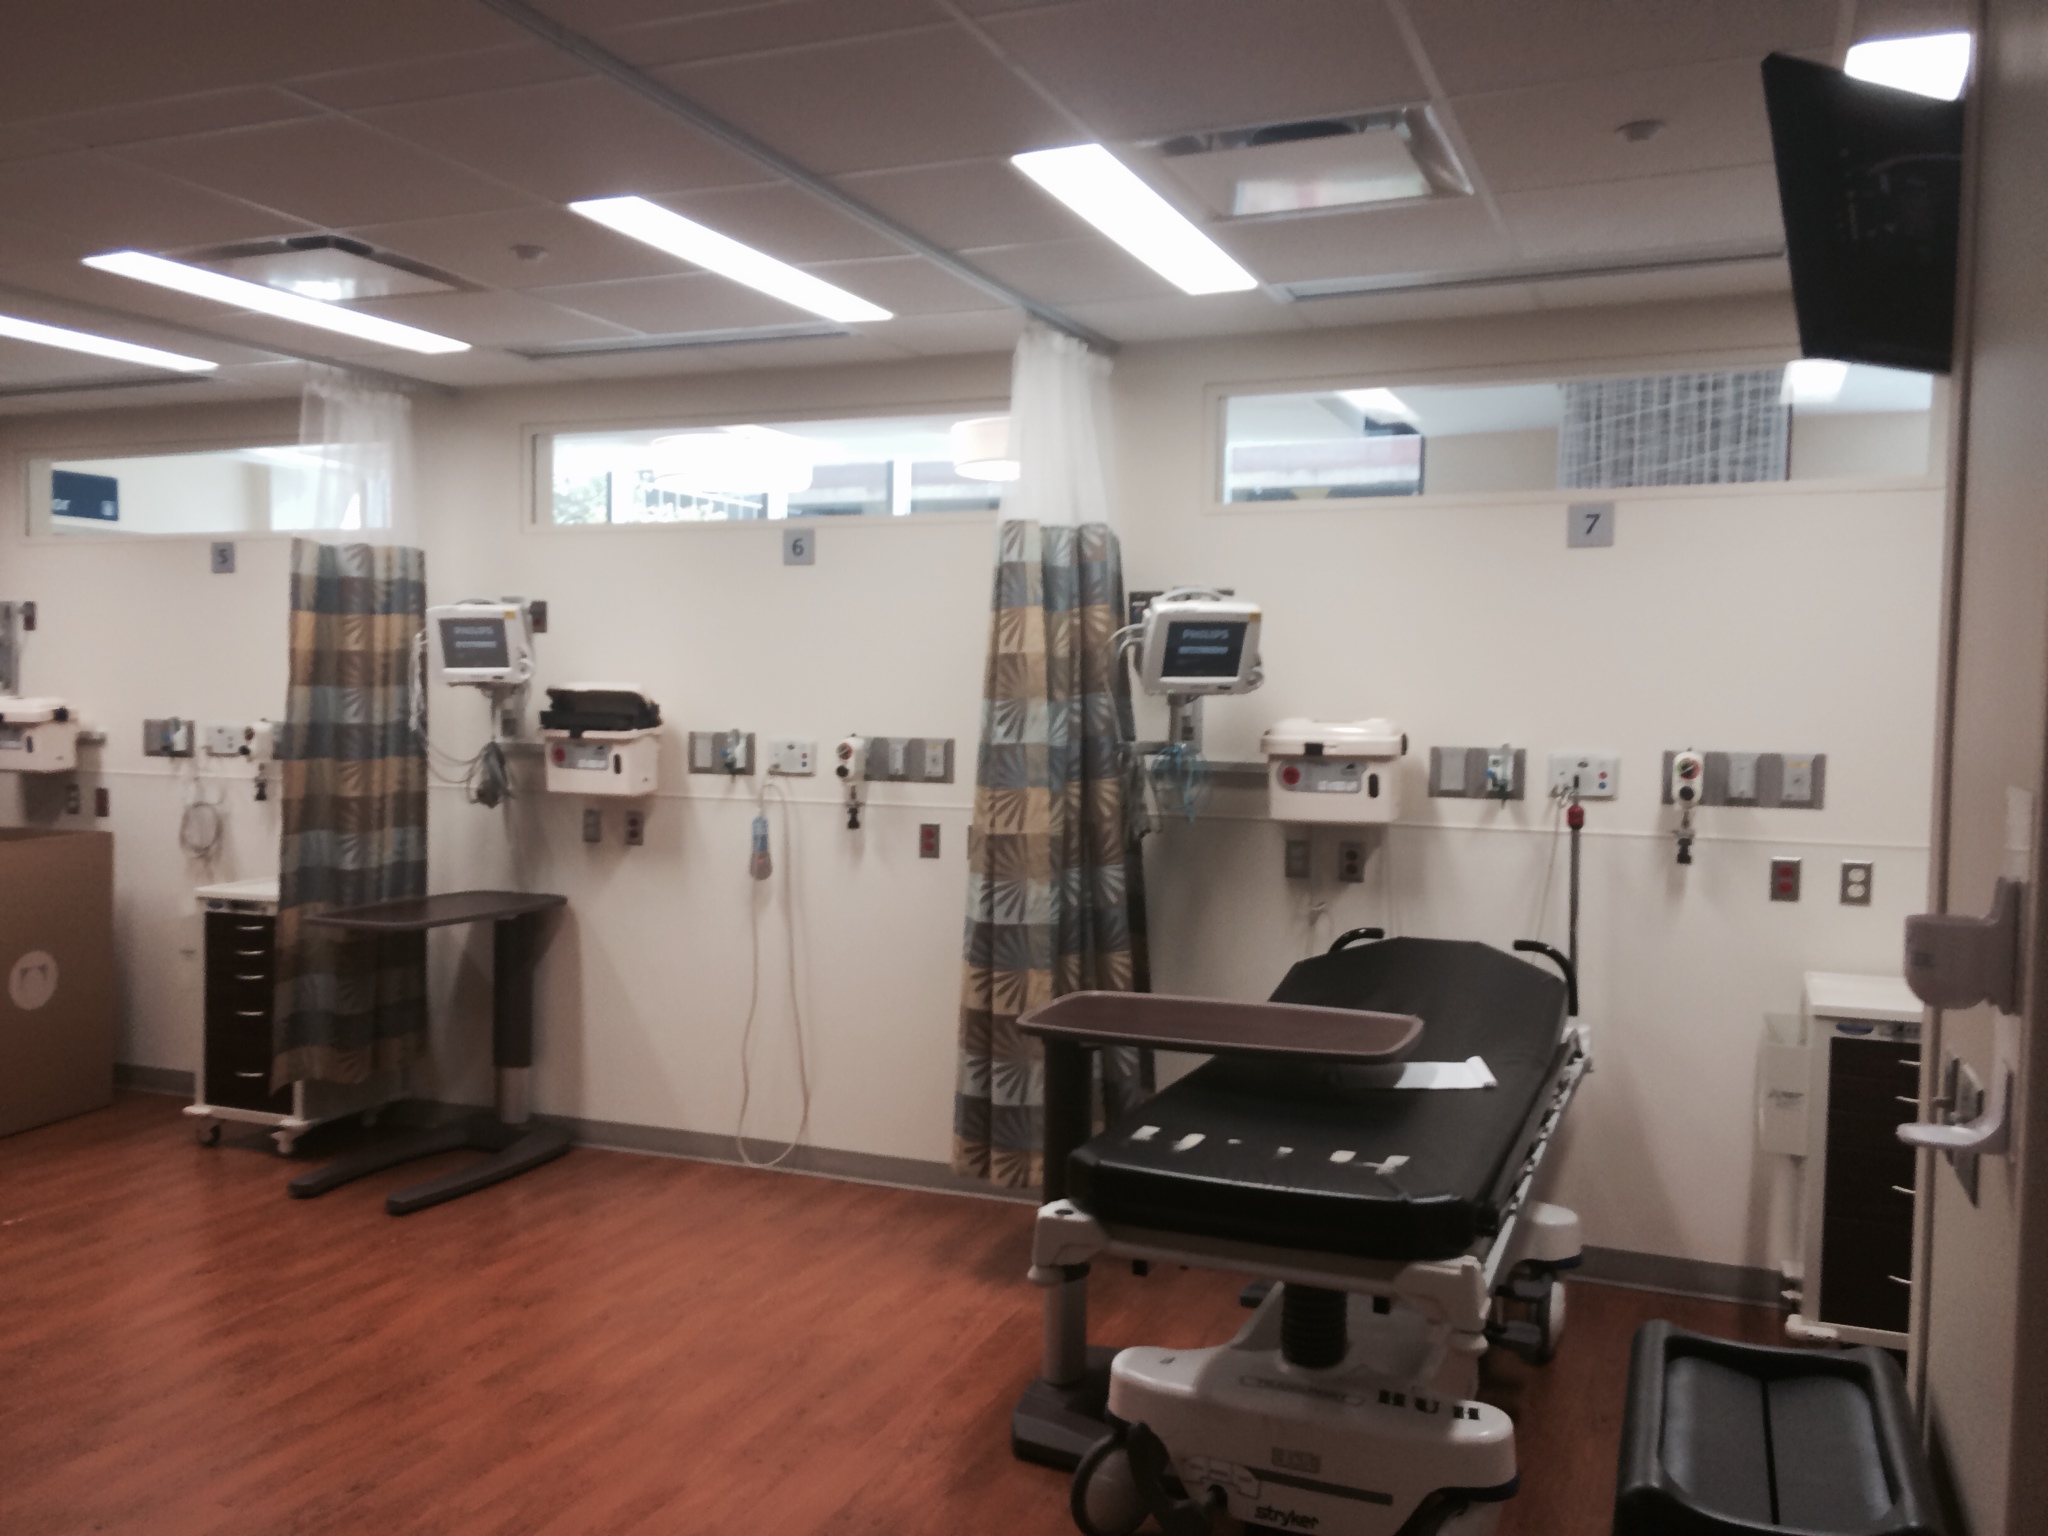 A patient post-procedure area in the new DMC Heart Hospital. (credit: Sean Lee/WWJ)